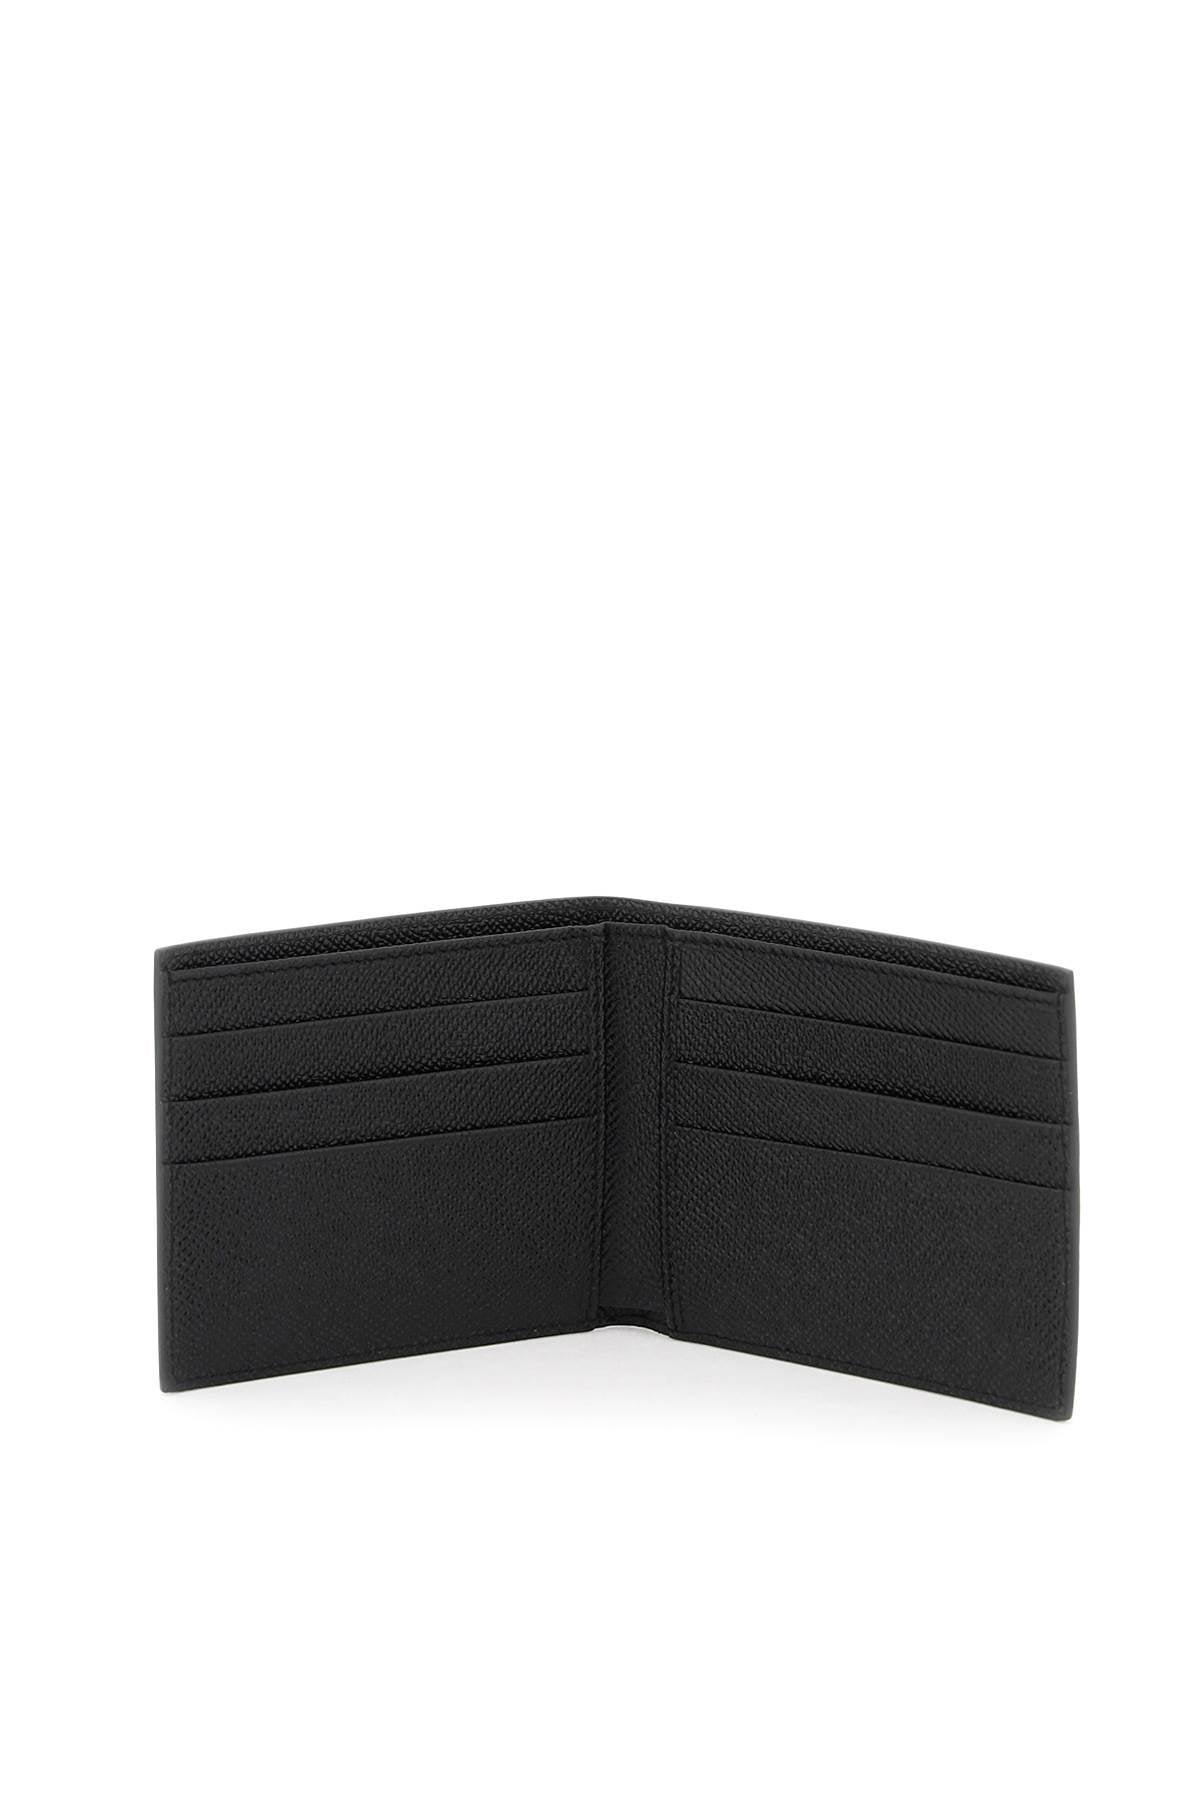 Dolce & gabbana leather wallet-1